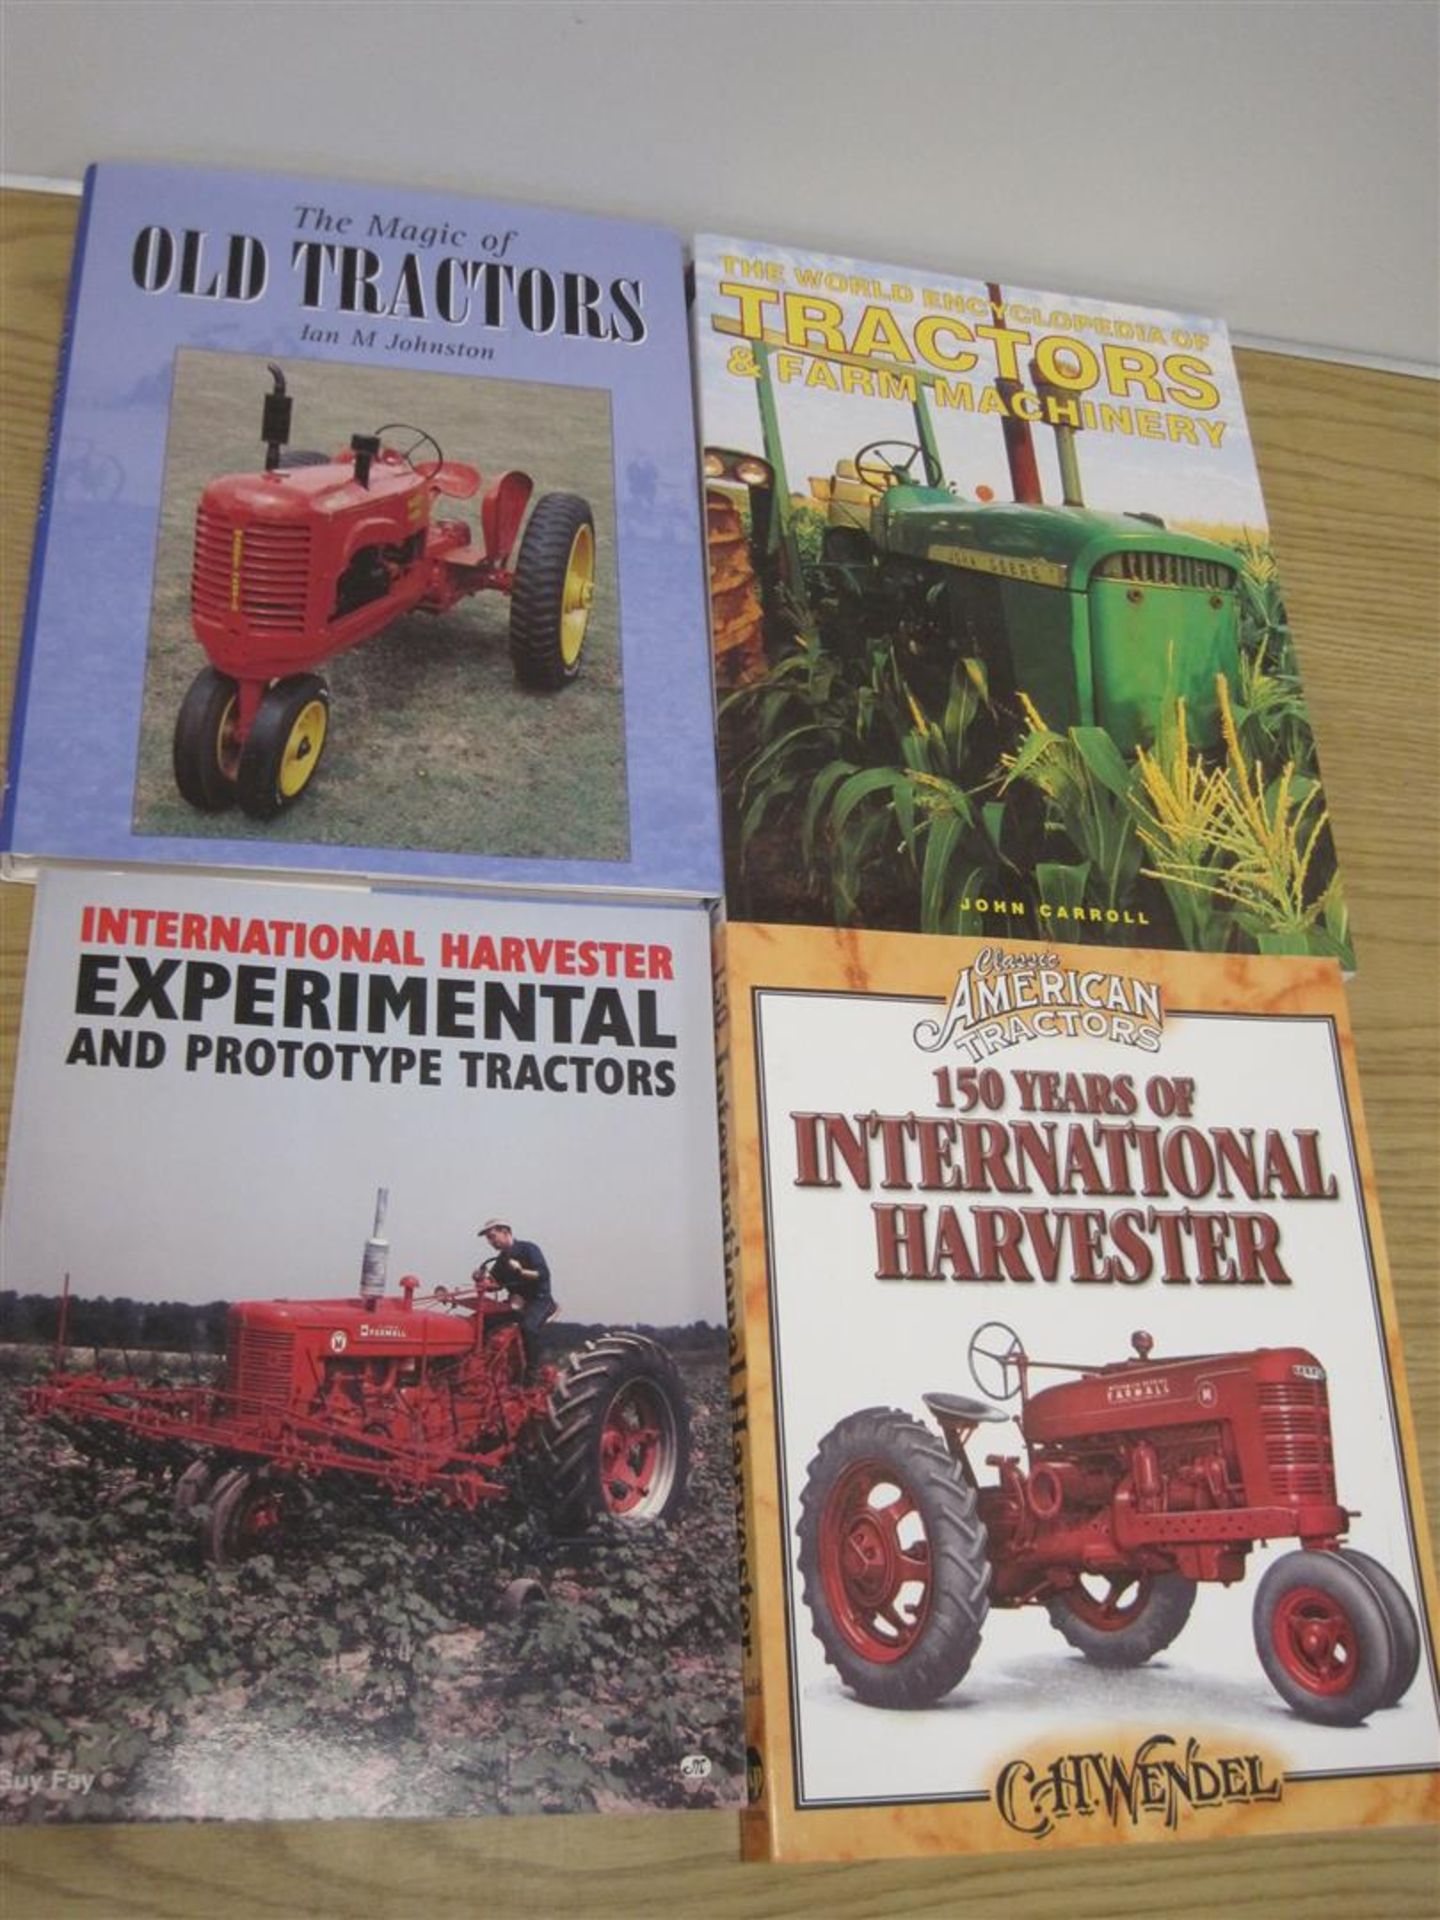 The Magic of old Tractors by Johnson, Encyclopedia of Tractors by Carroll, International Harvester